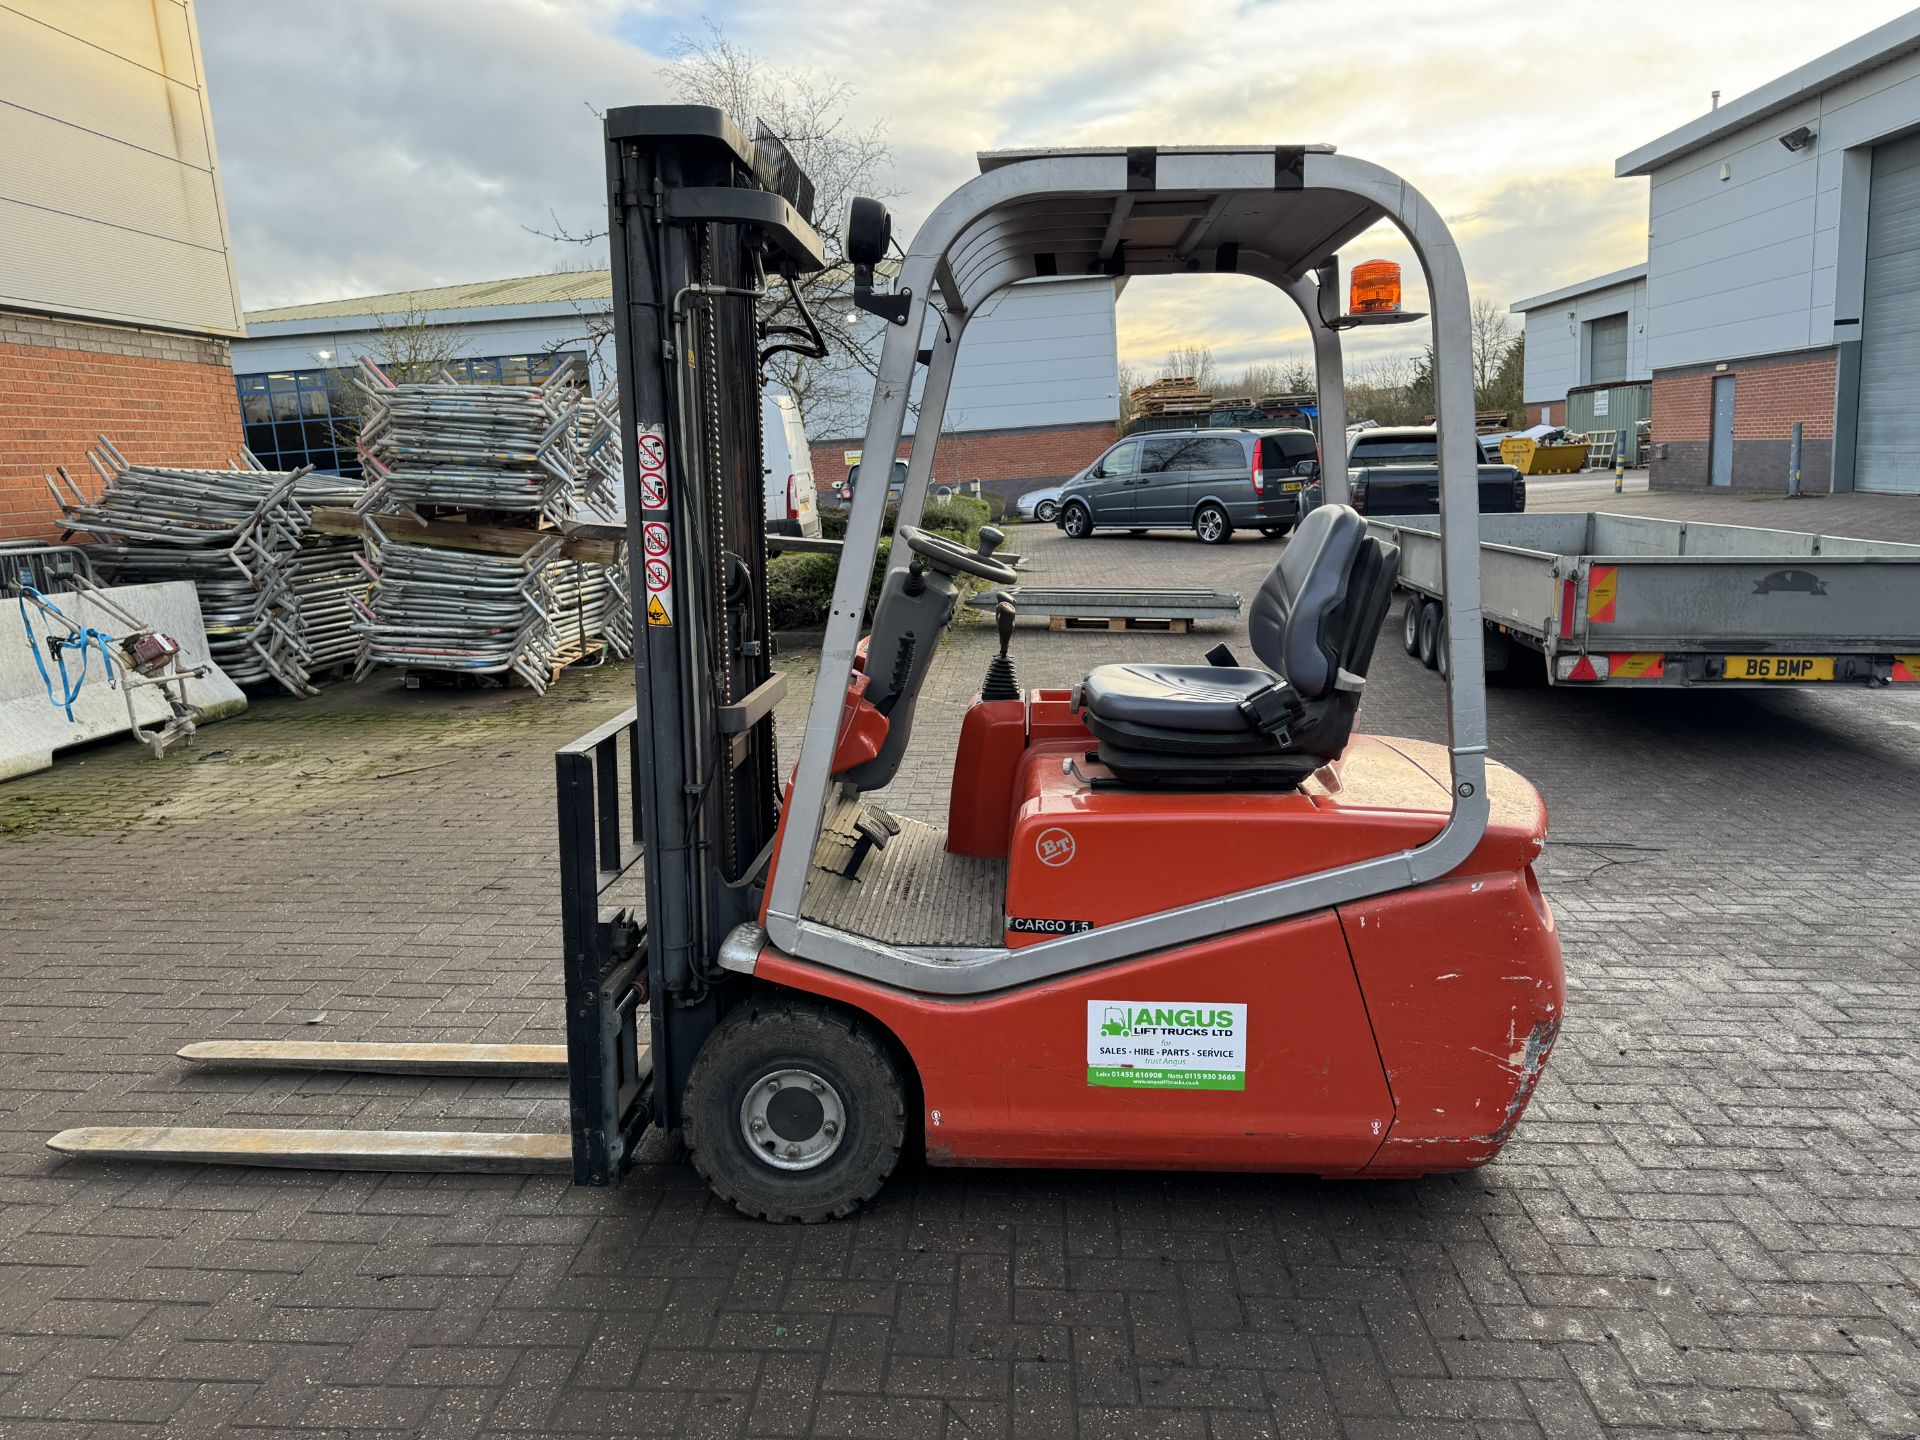 Cargo Model C 3 E 150 Tri Wheel Container Specification Electric Reach Truck - Image 2 of 28